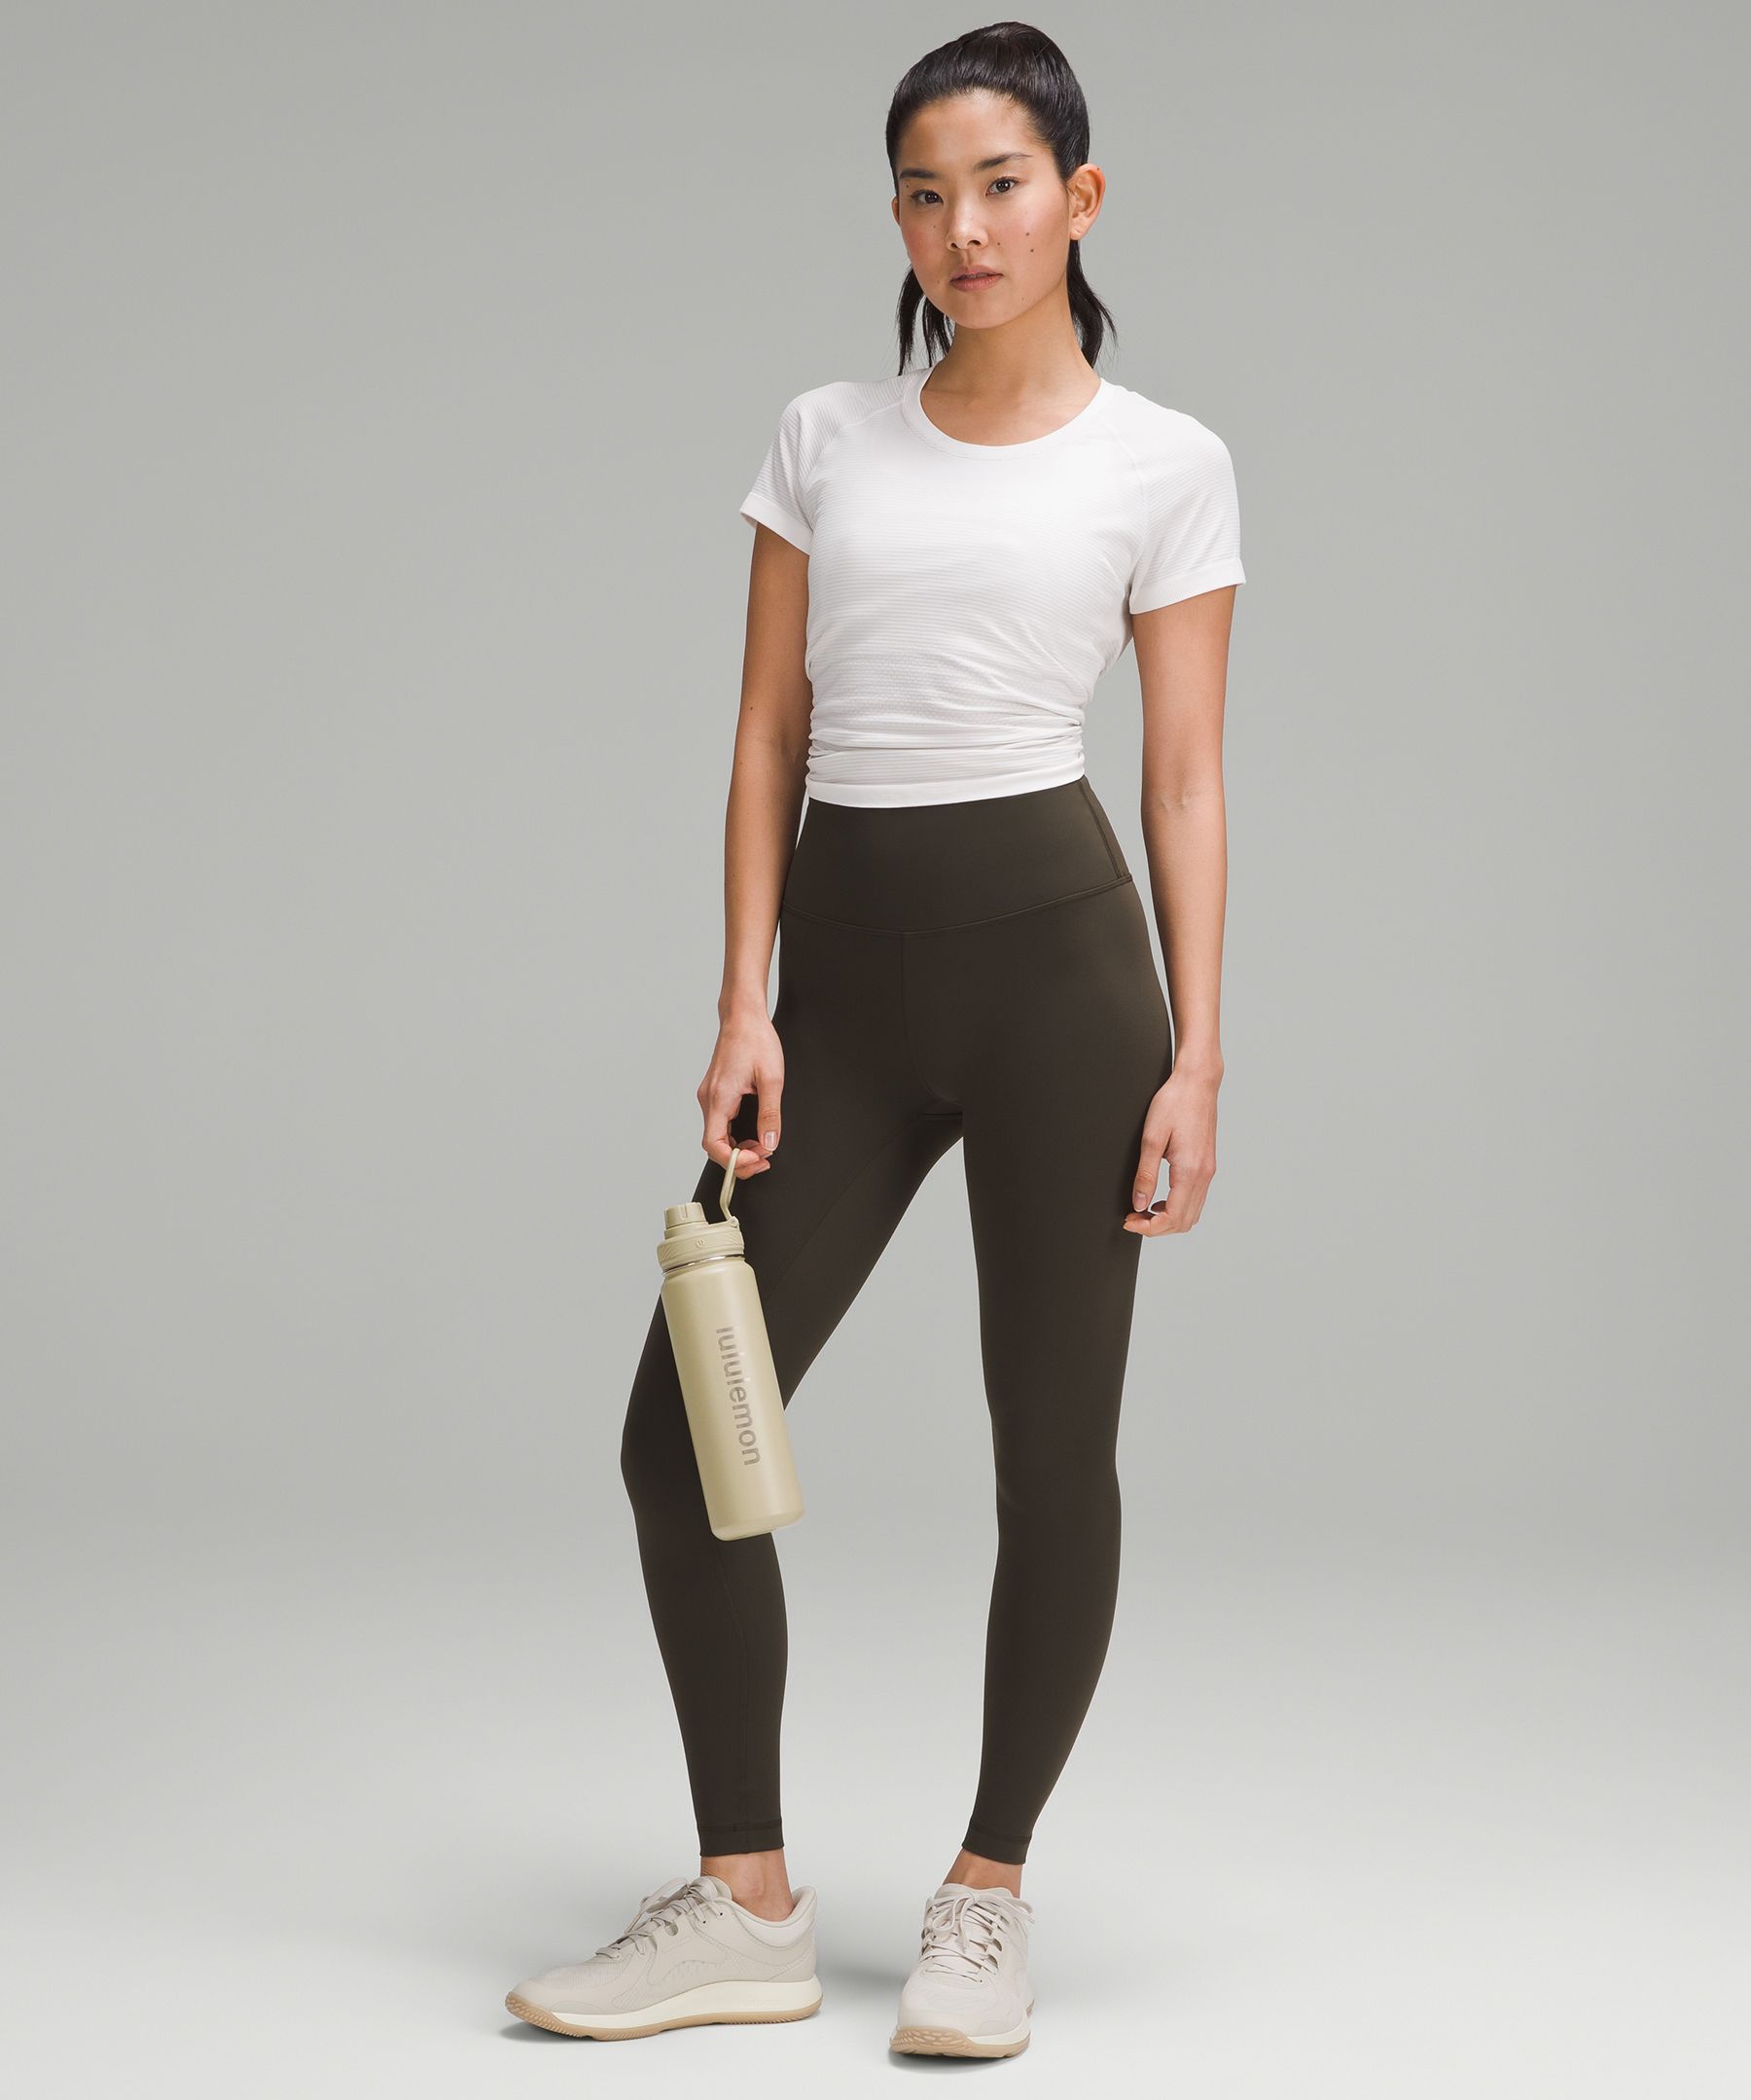 What do you wear under see-through leggings? - Quora